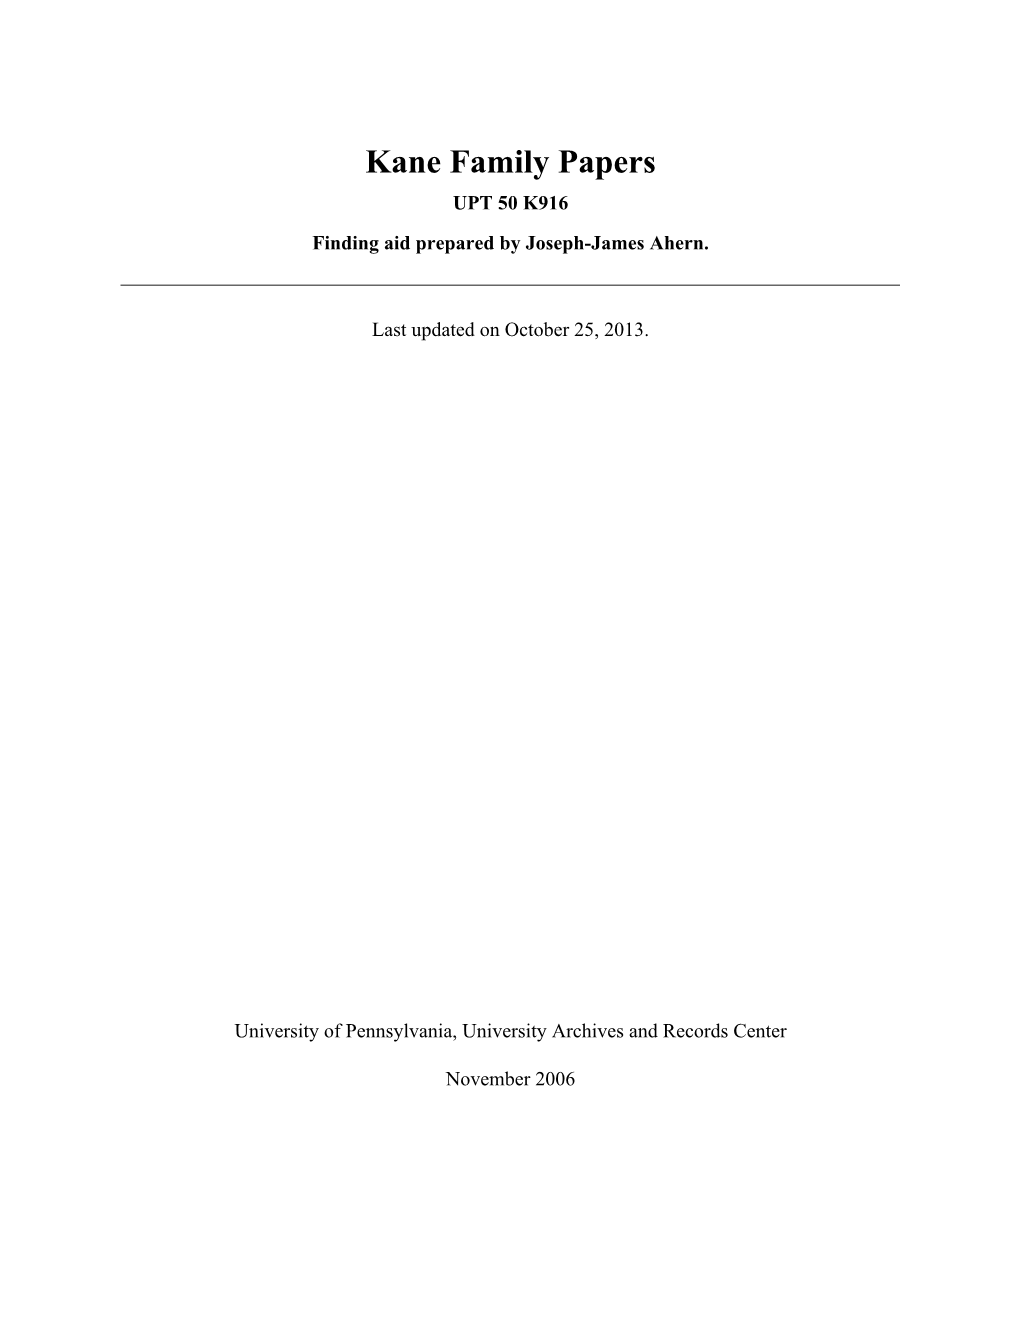 Kane Family Papers UPT 50 K916 Finding Aid Prepared by Joseph-James Ahern